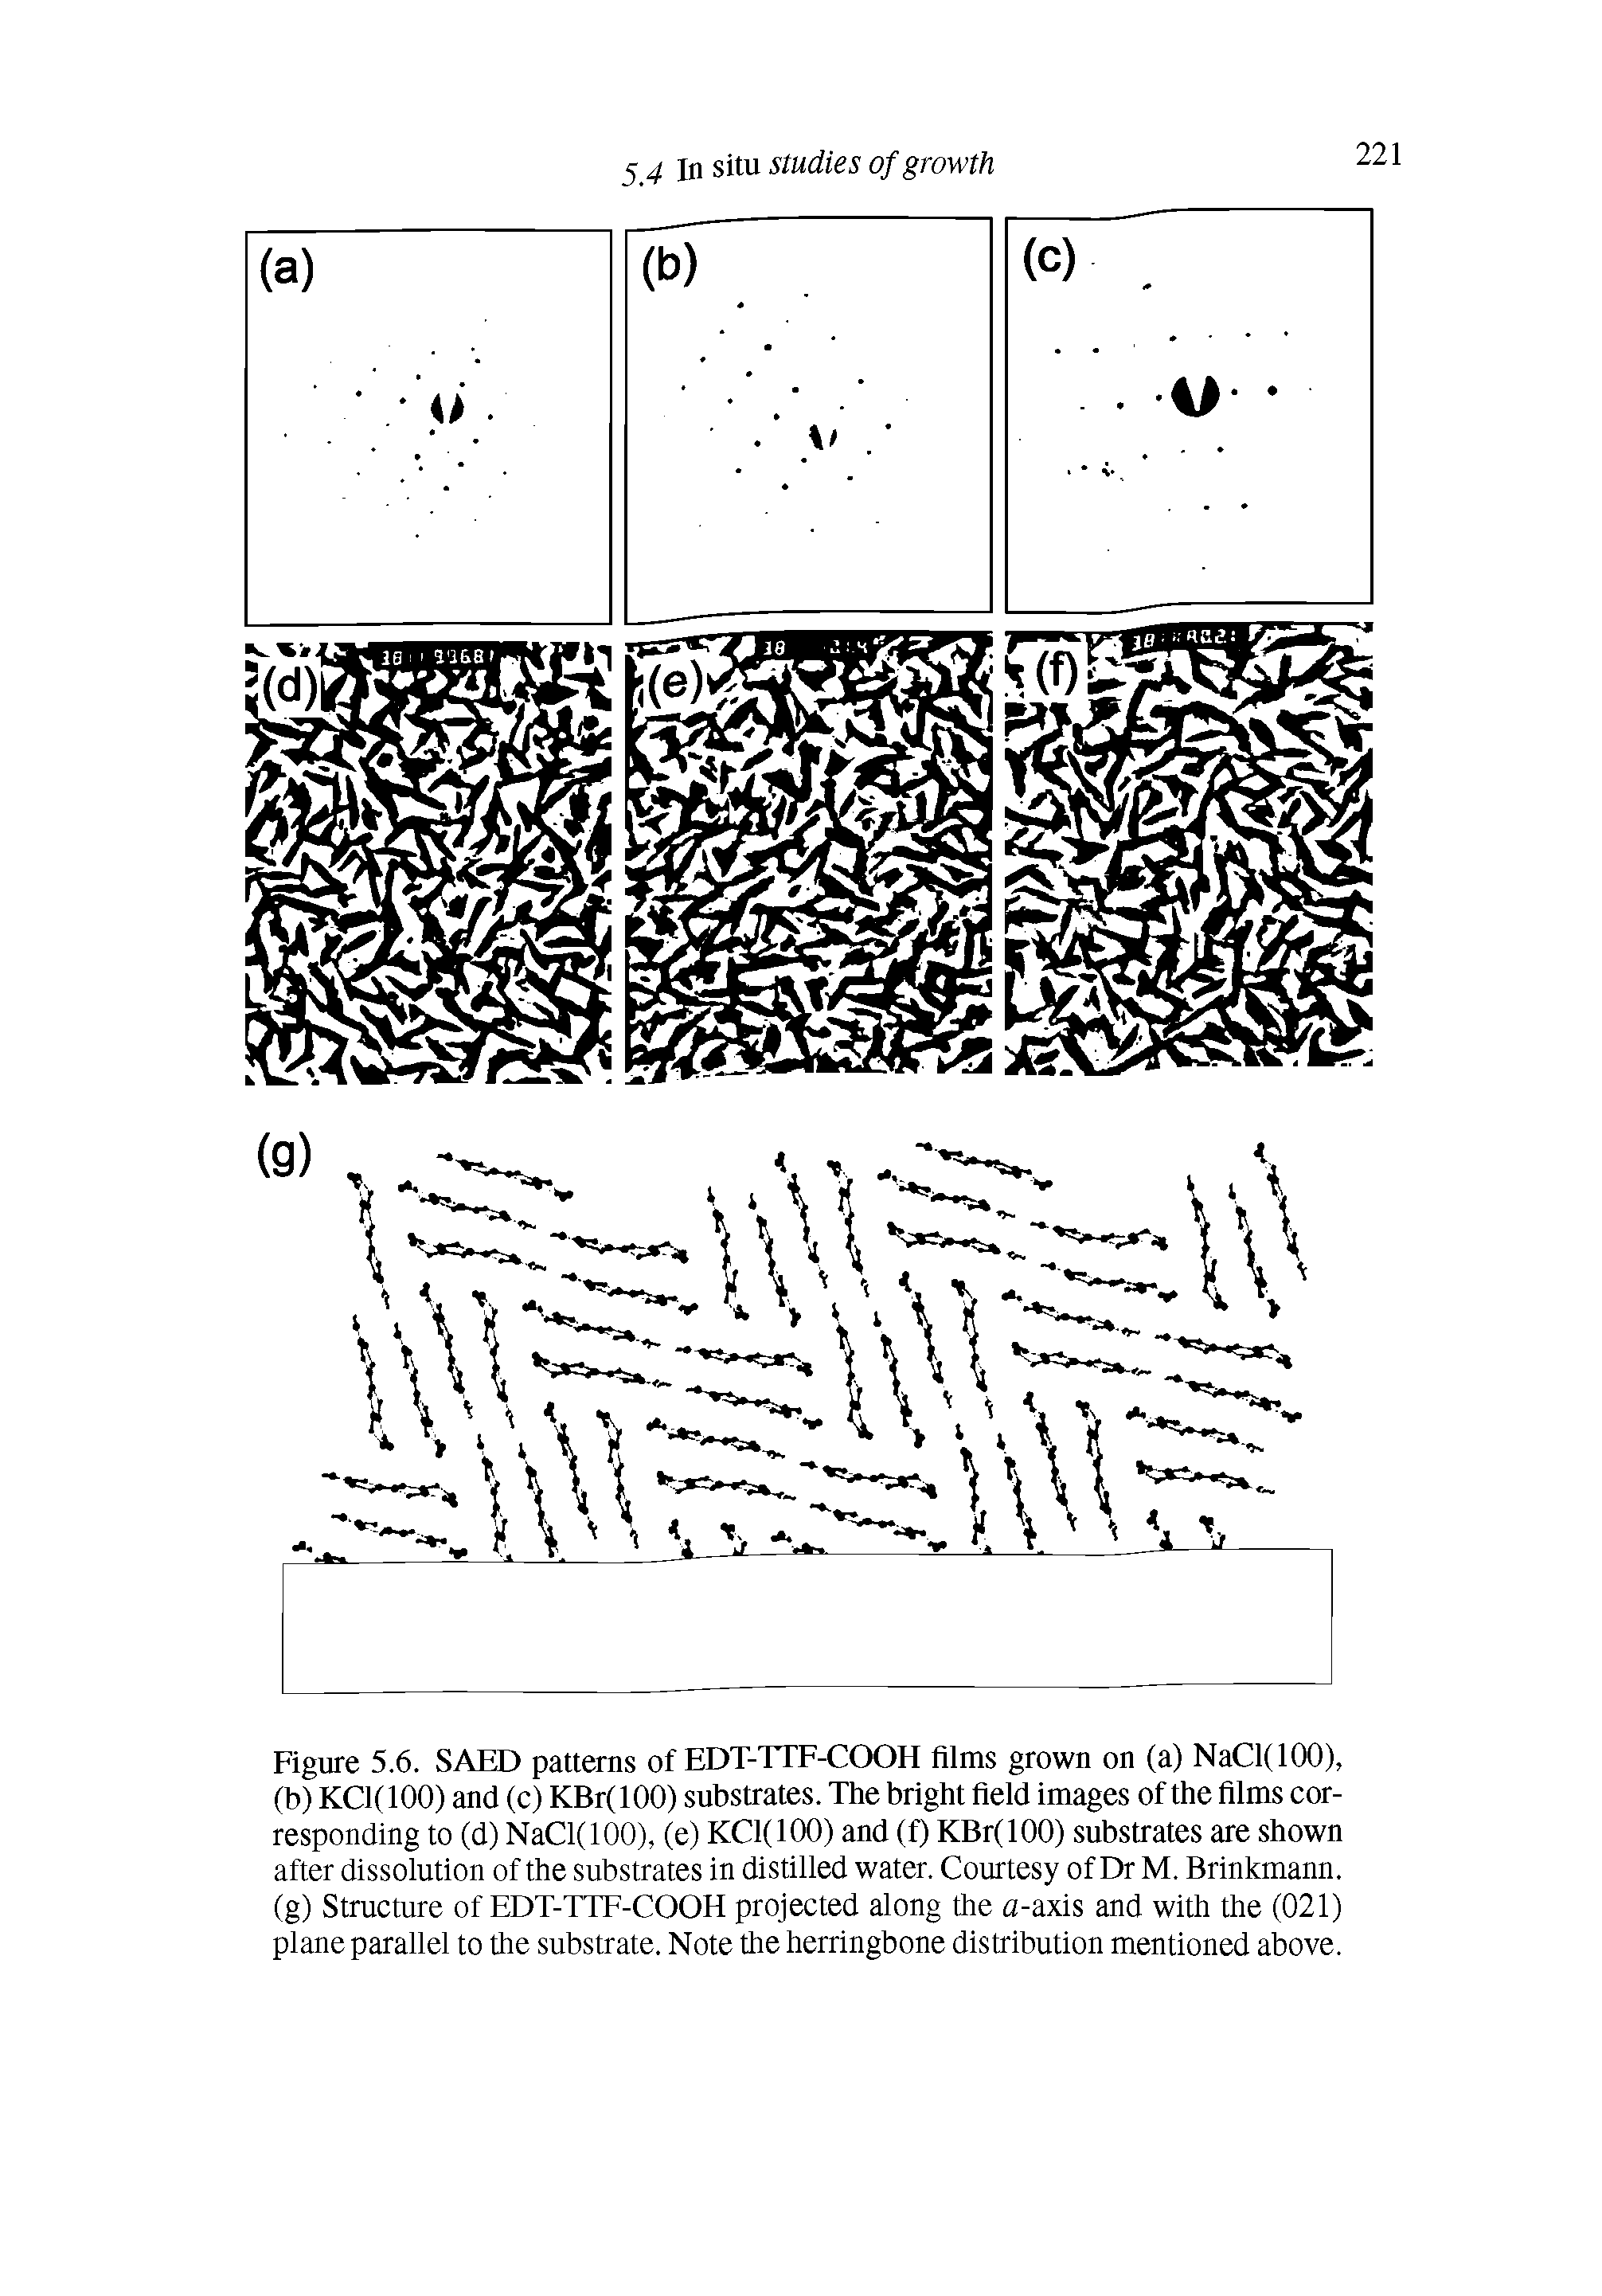 Figure 5.6. SAED patterns of EDT-TTF-COOH films grown on (a) NaCl(lOO), (b) KCl(lOO) and (c) KBr(lOO) substrates. The bright field images of the films corresponding to (d) NaCl(lOO), (e) KCl(lOO) and (f) KBr(lOO) substrates are shown after dissolution of the substrates in distilled water. Courtesy of Dr M. Brinkmann. (g) Structure of EDT-TTF-COOH projected along the u-axis and with the (021) plane parallel to the substrate. Note the herringbone distribution mentioned above.